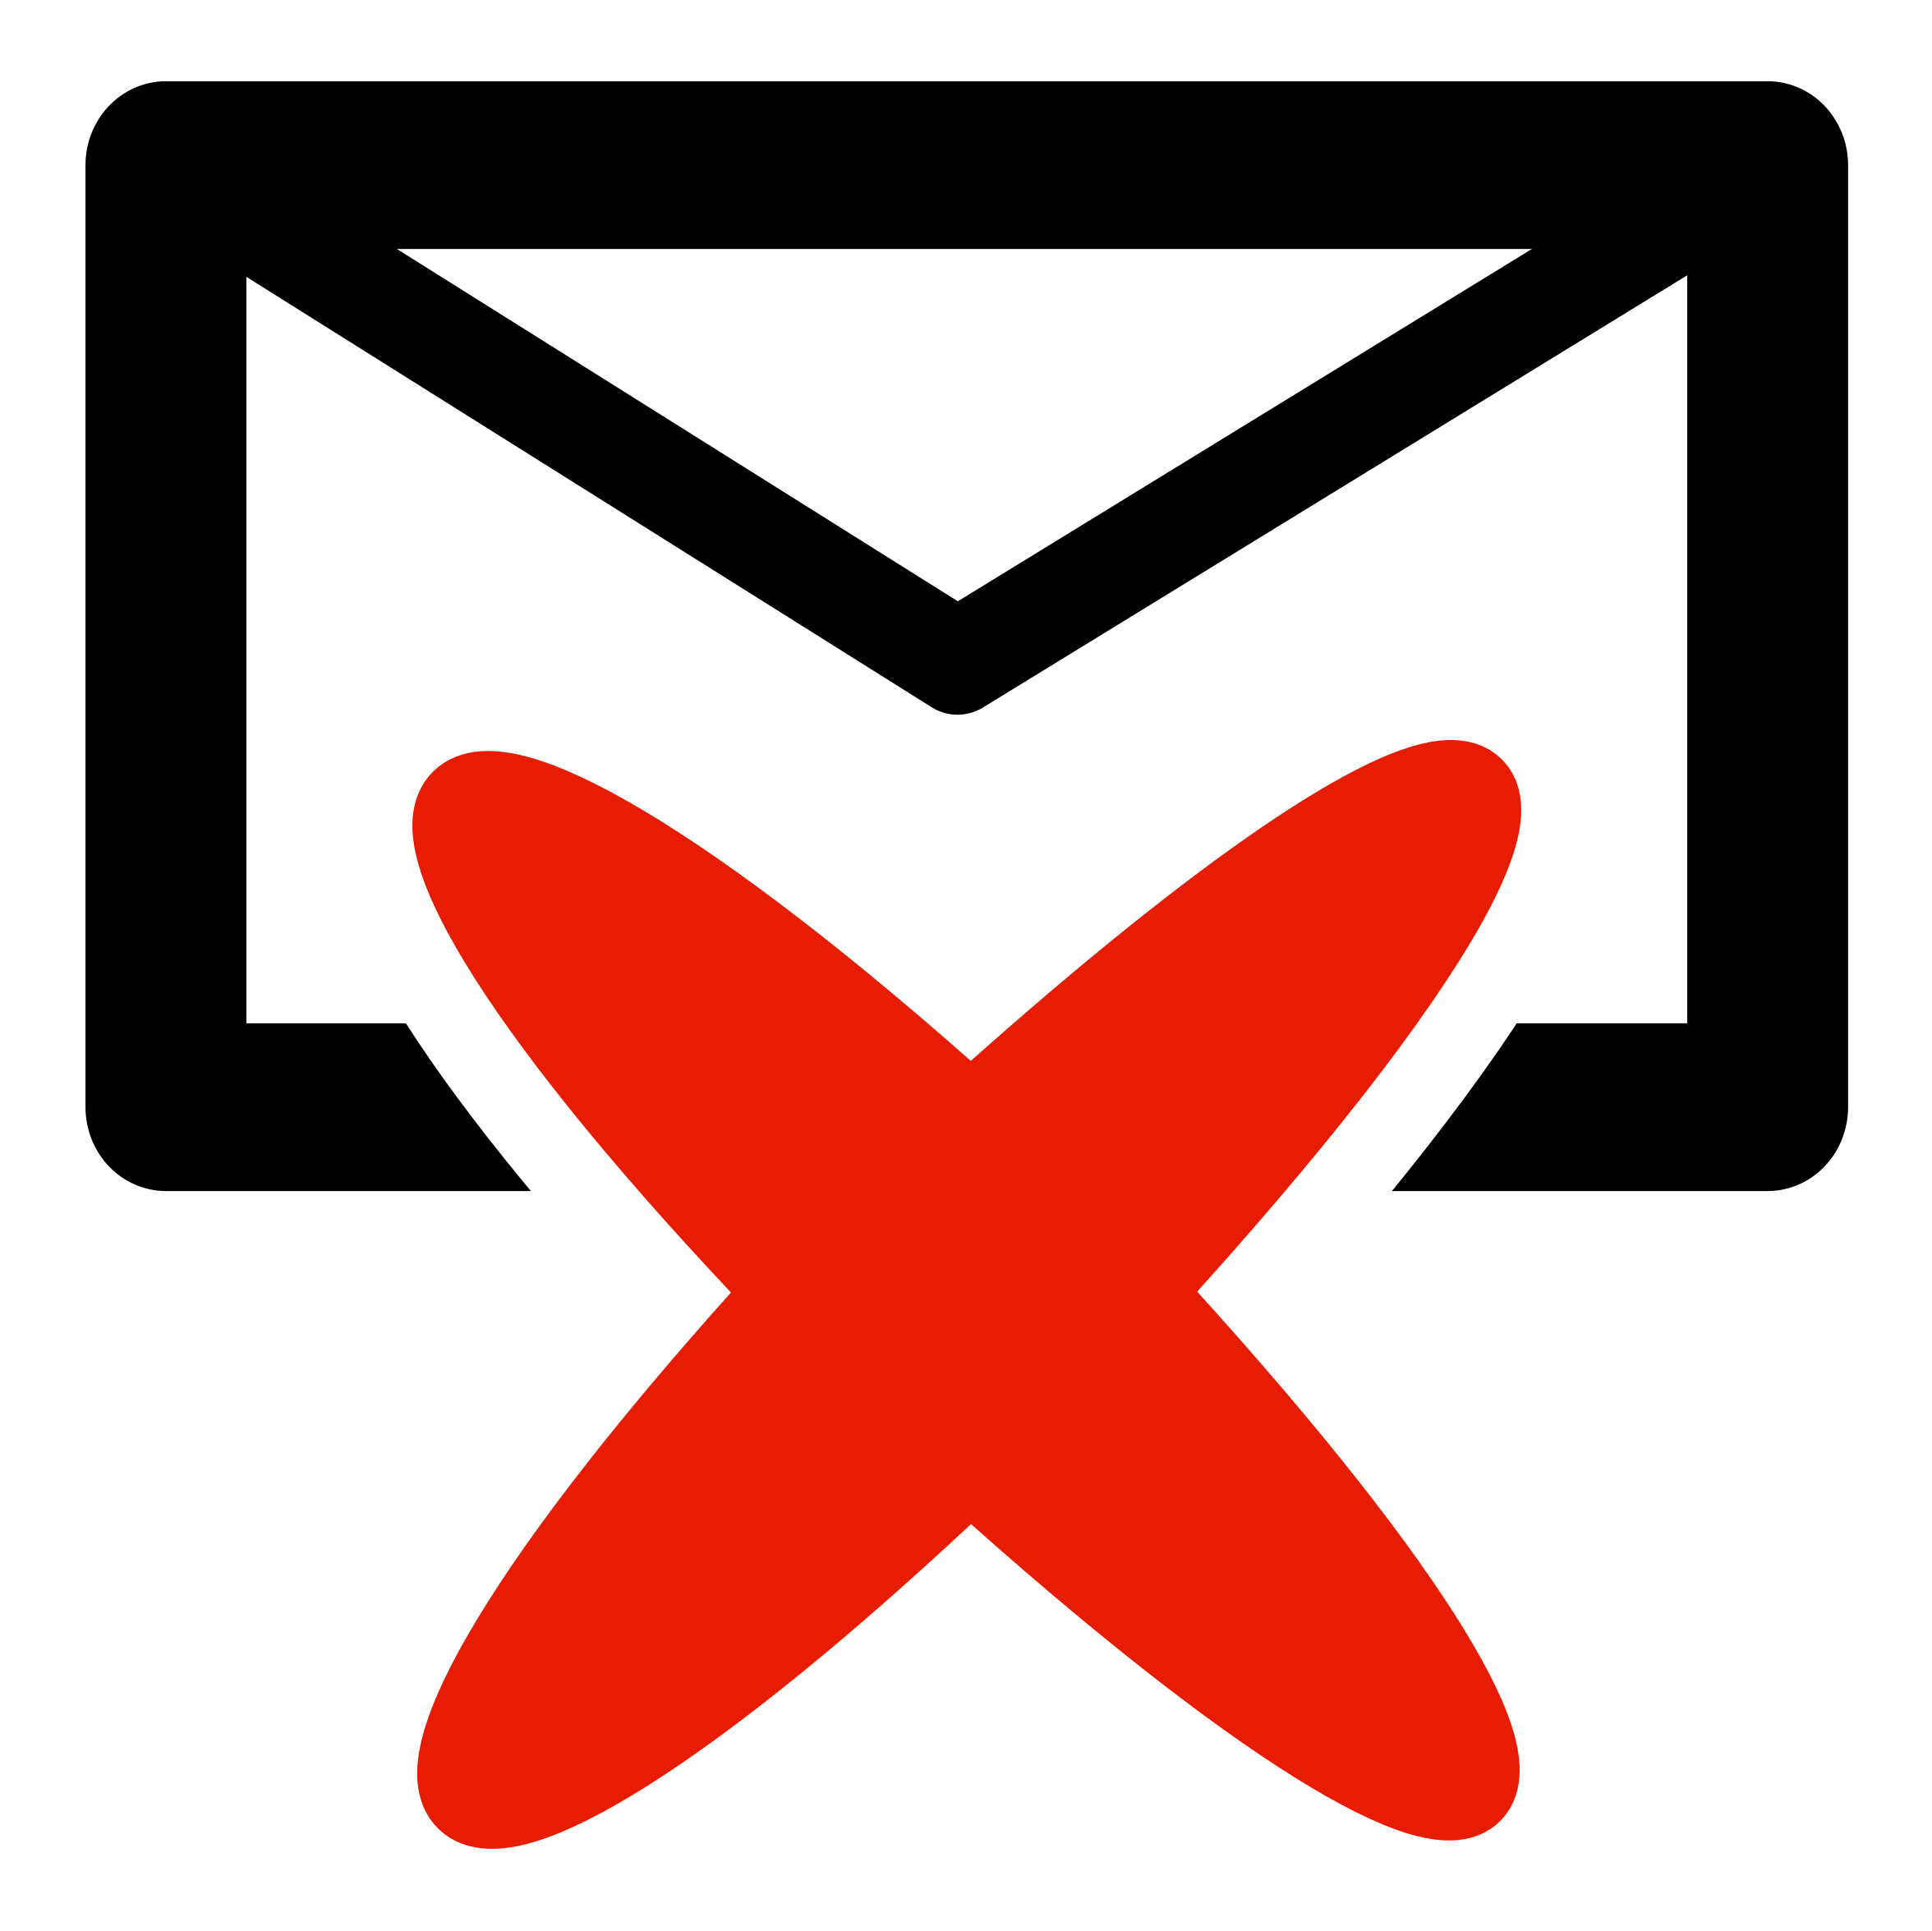 A Red X And Black Envelope With White Border